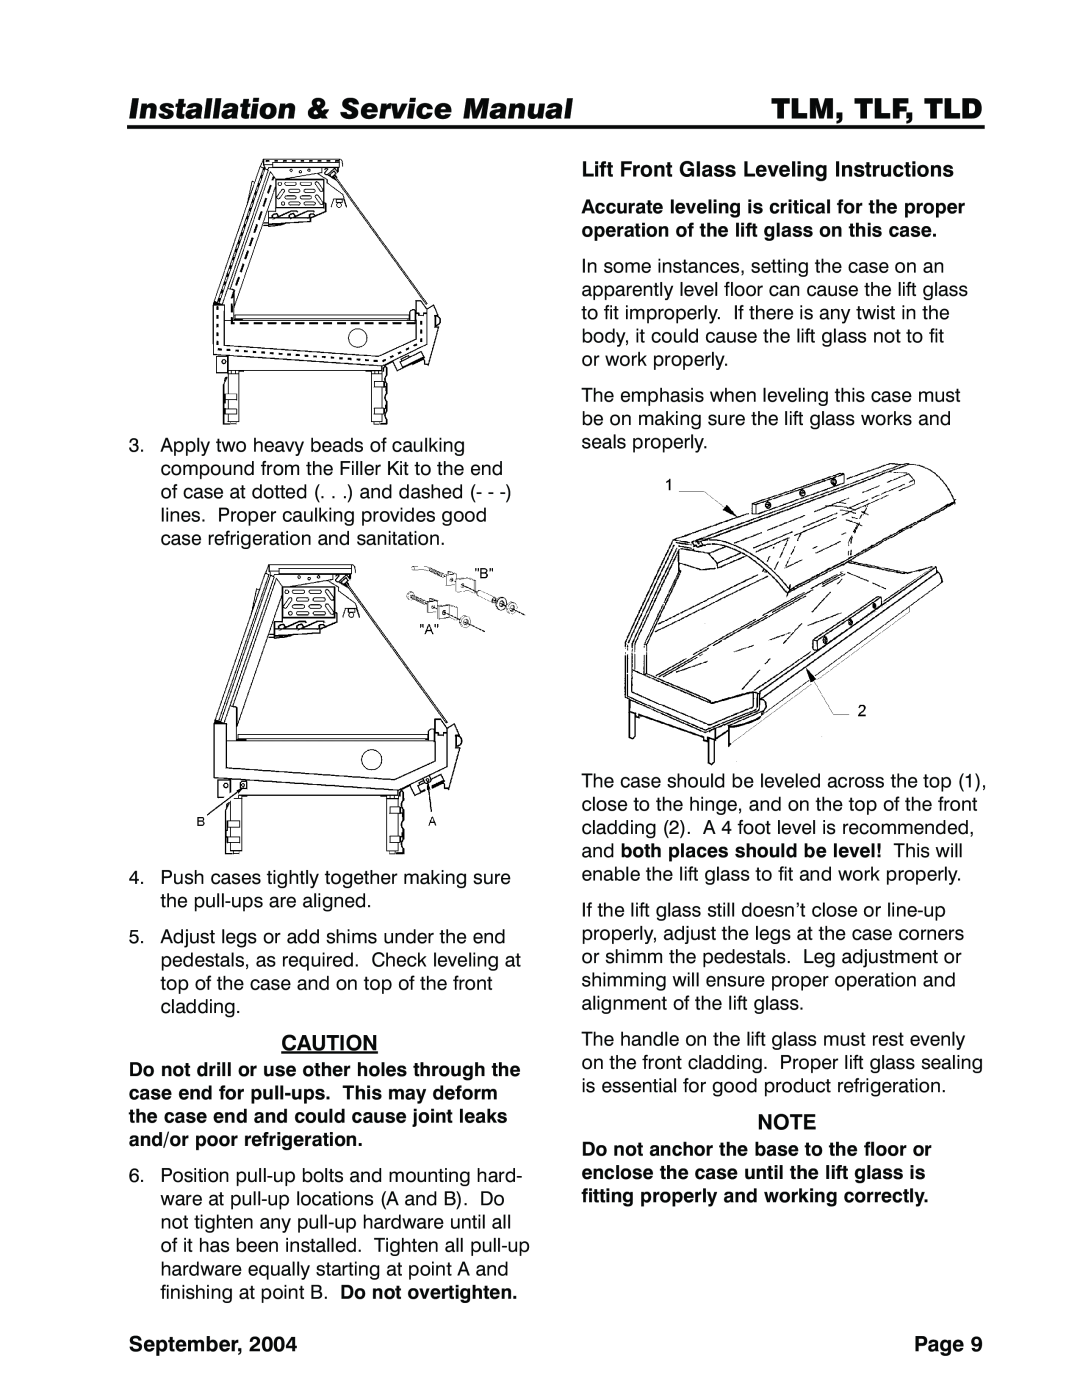 Tyler Refrigeration TLF, TLD, TLM service manual Tlm, Tlf, Tld, Lift Front Glass Leveling Instructions, September, Page 